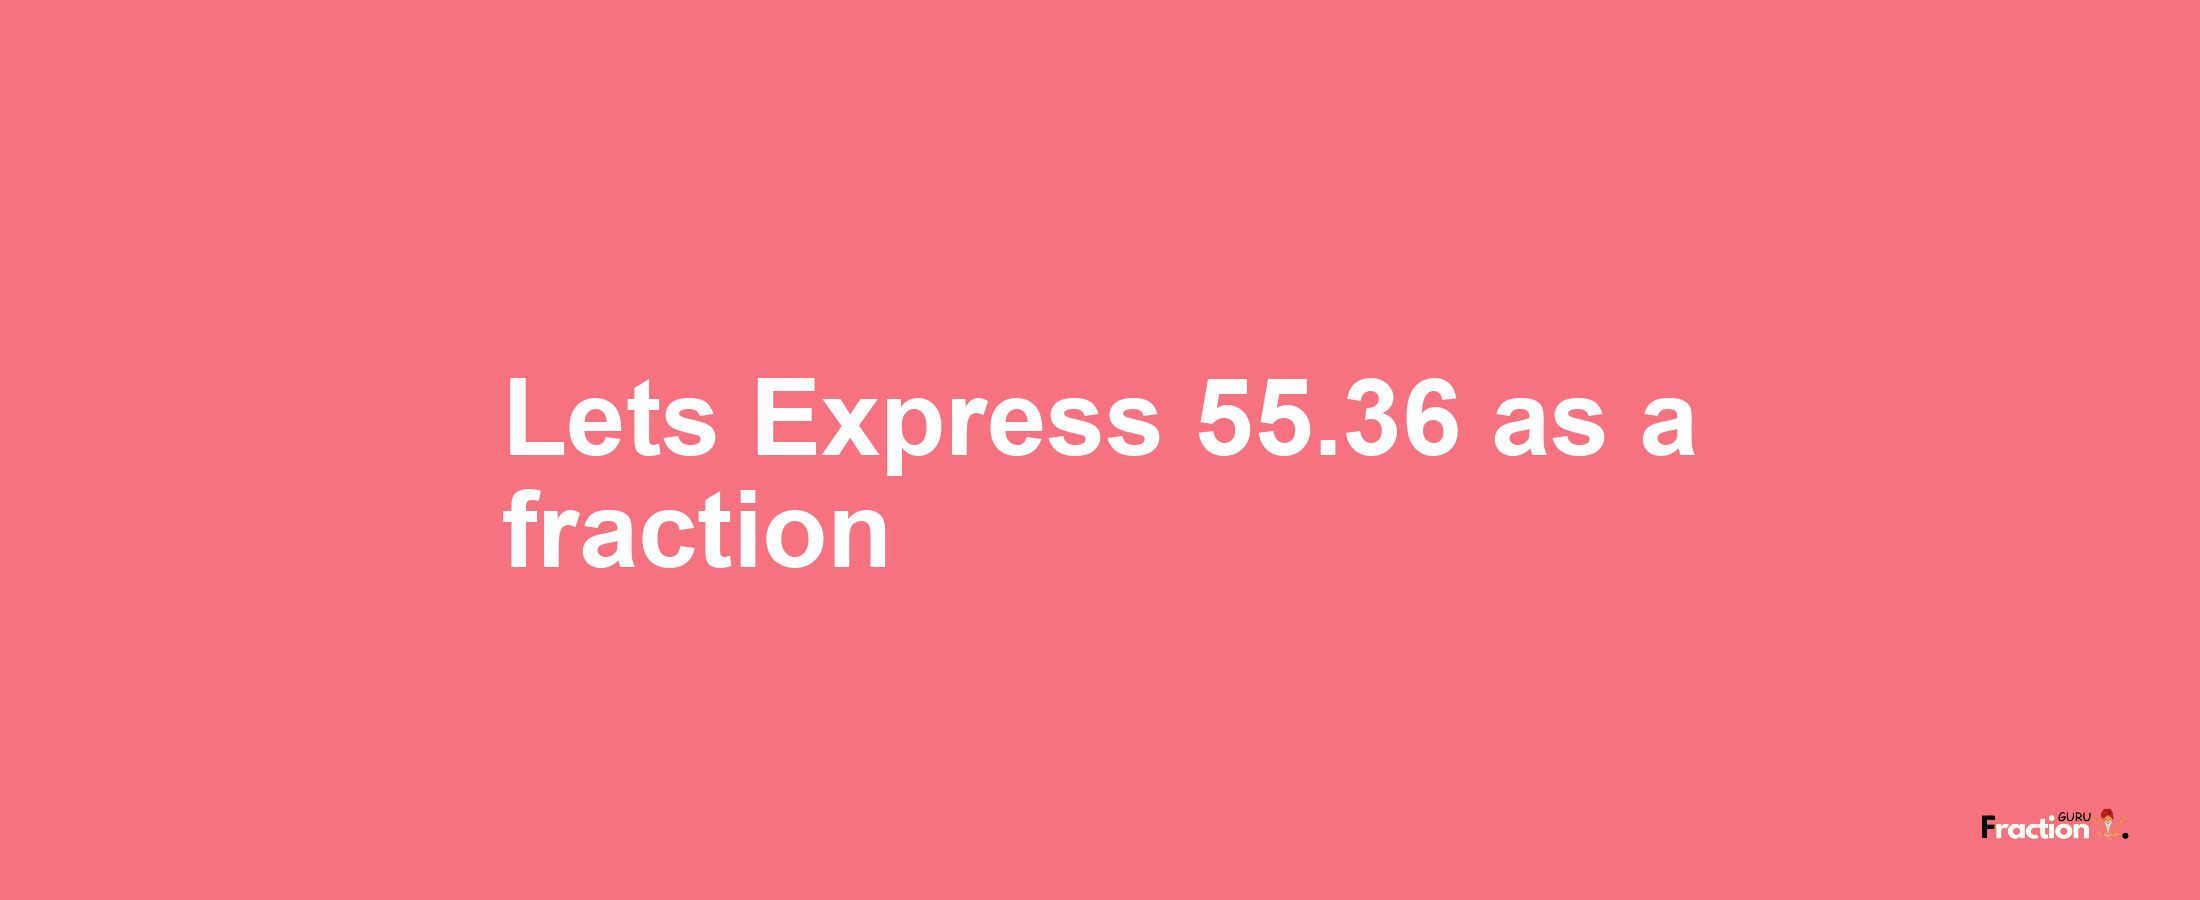 Lets Express 55.36 as afraction